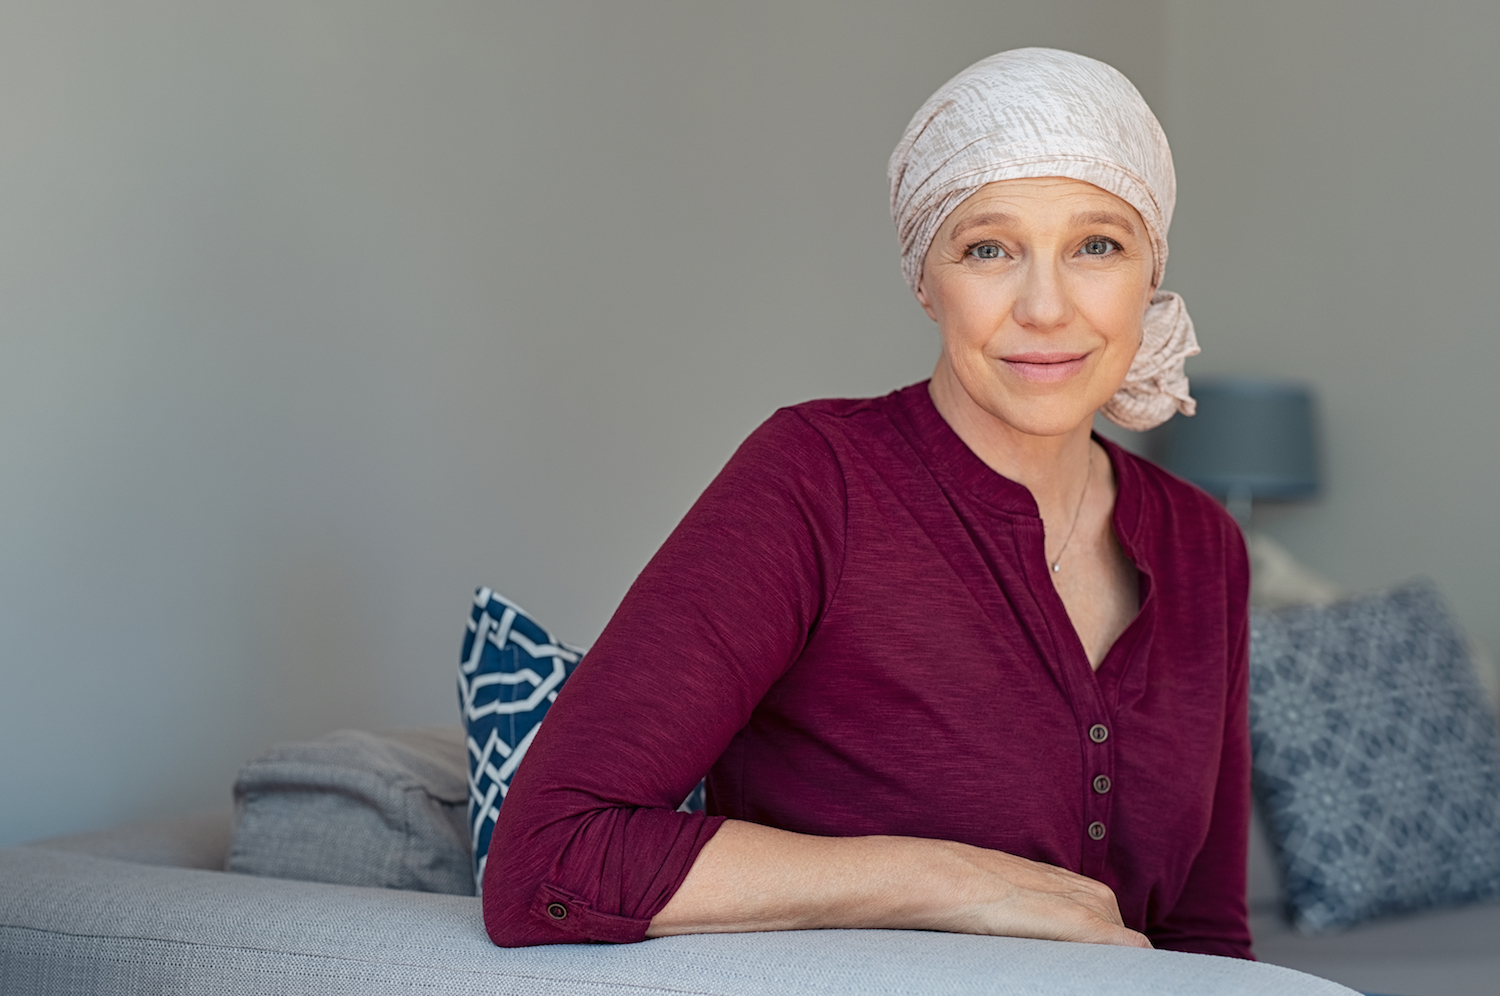 Woman suffering from cancer